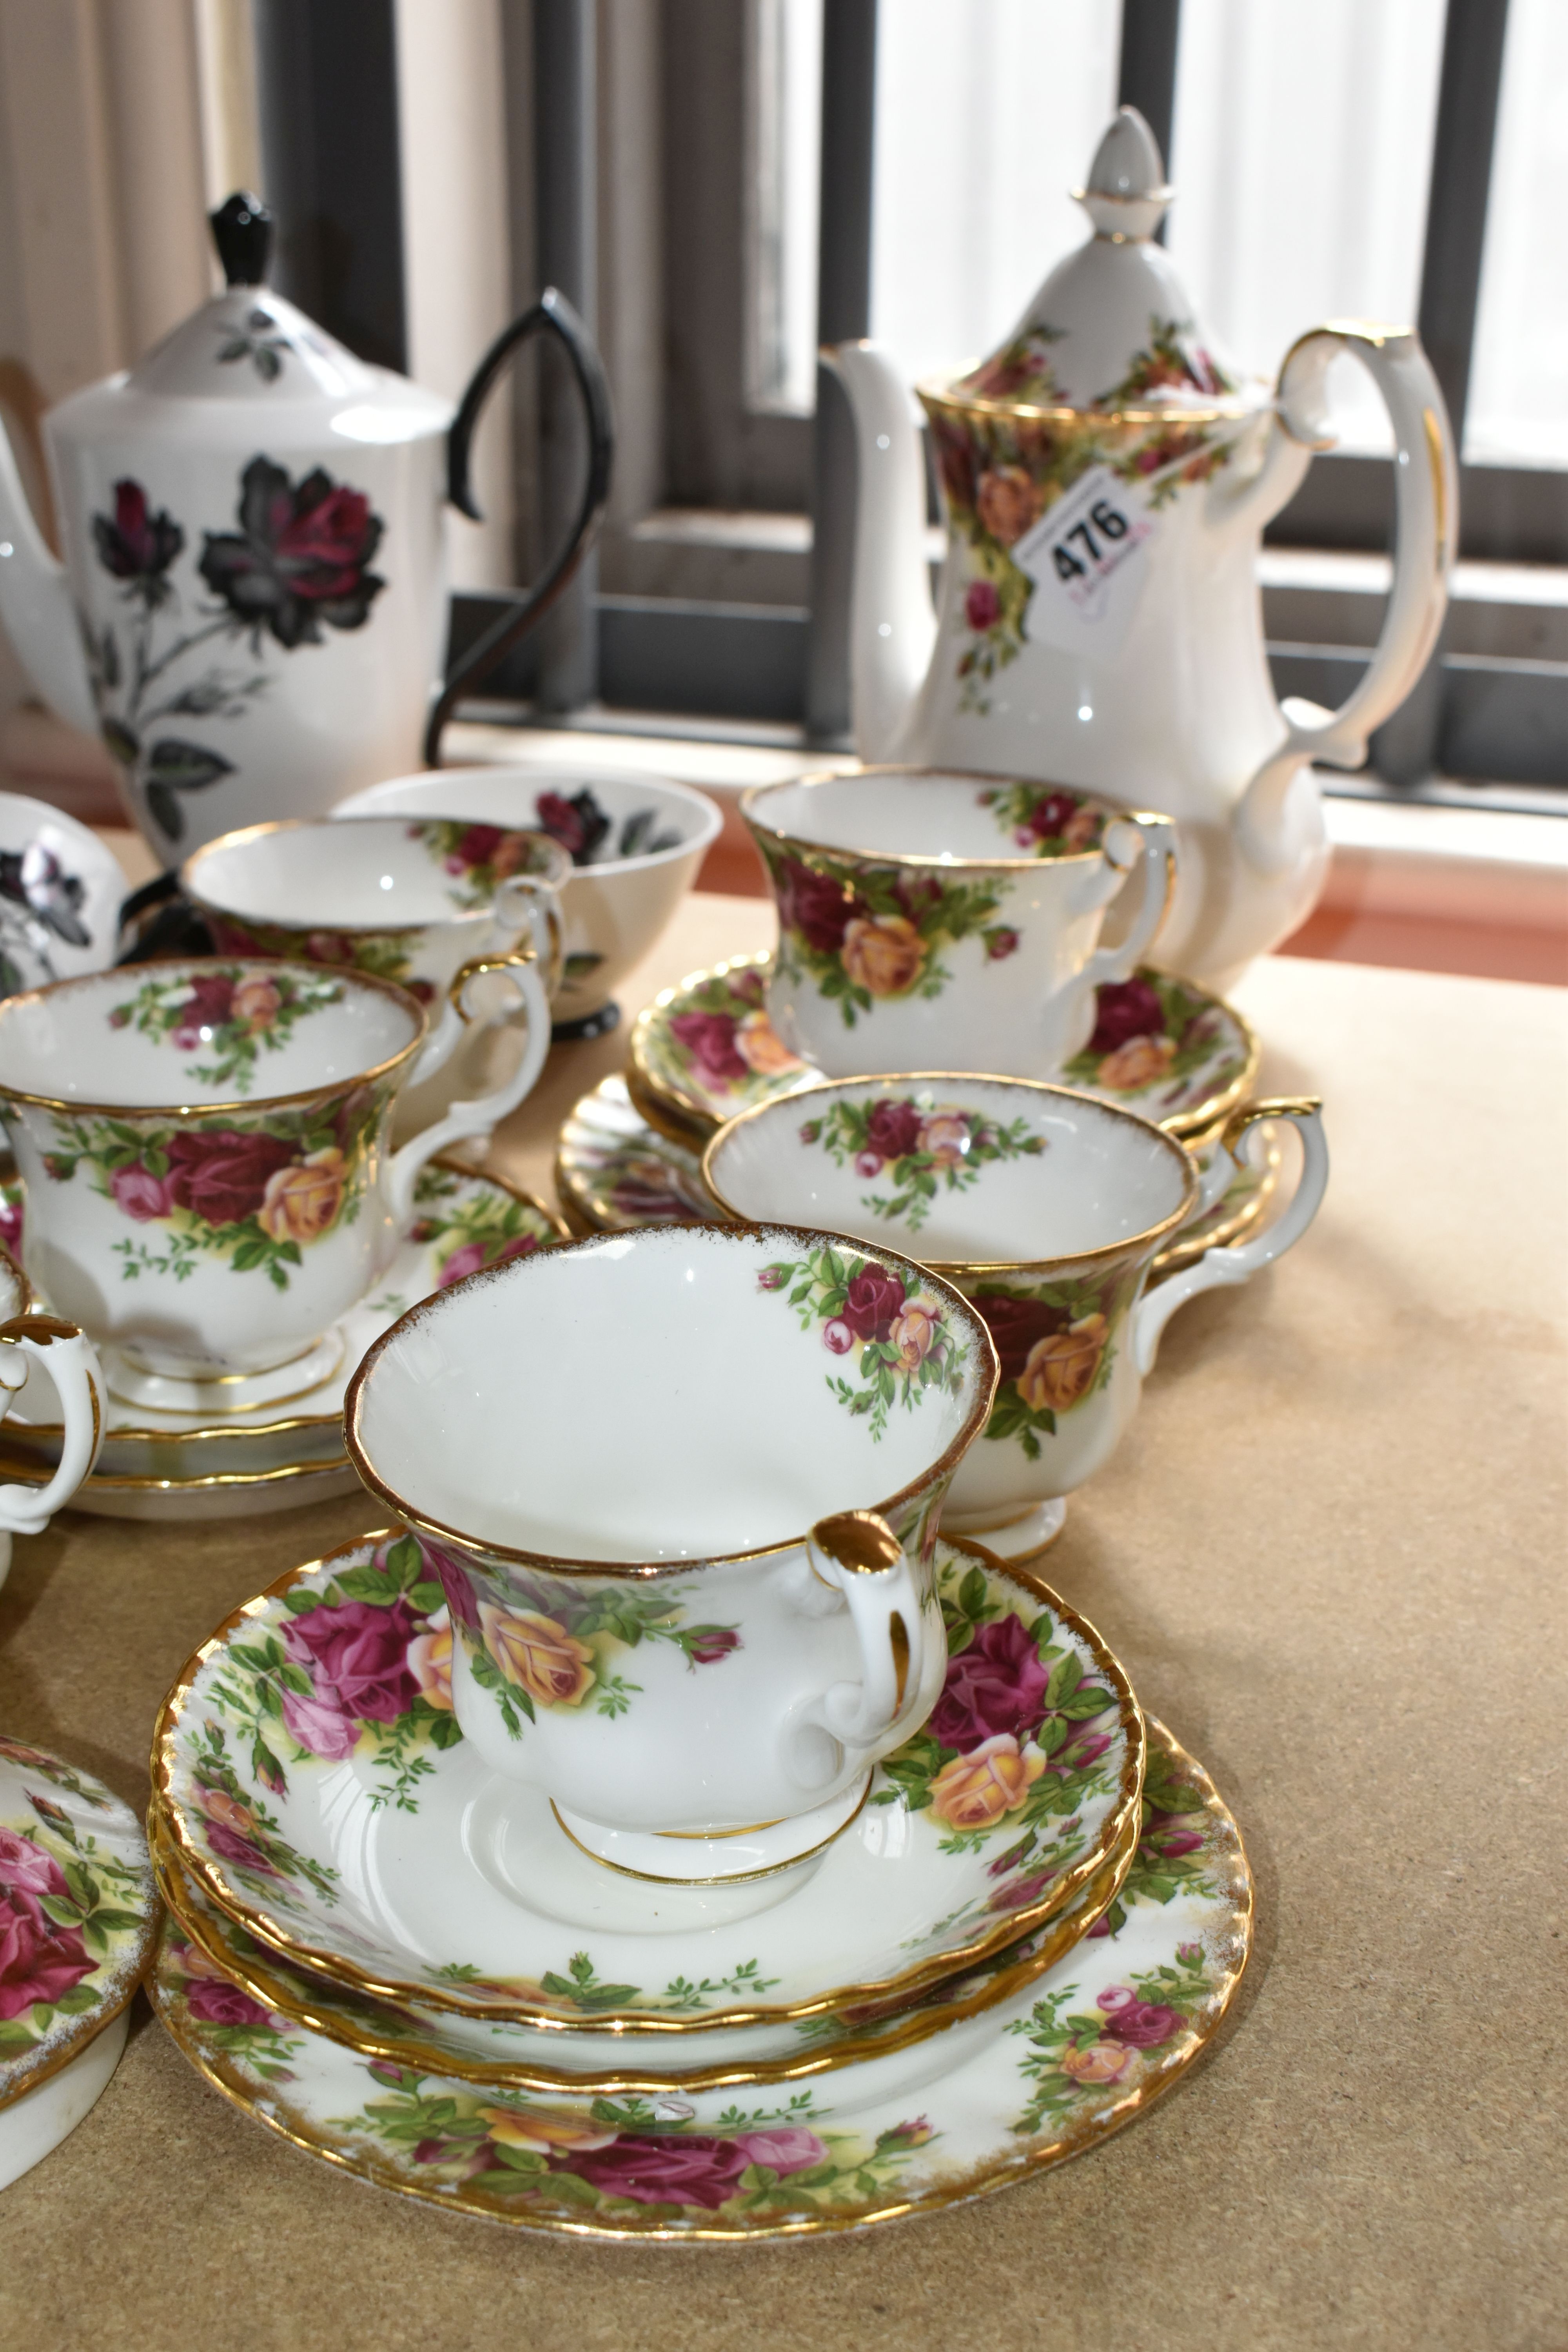 TWO ROYAL ALBERT PORCELAIN PART TEA SETS IN 'MASQUERADE' AND 'OLD COUNTRY ROSES' PATTERNS, including - Image 2 of 5